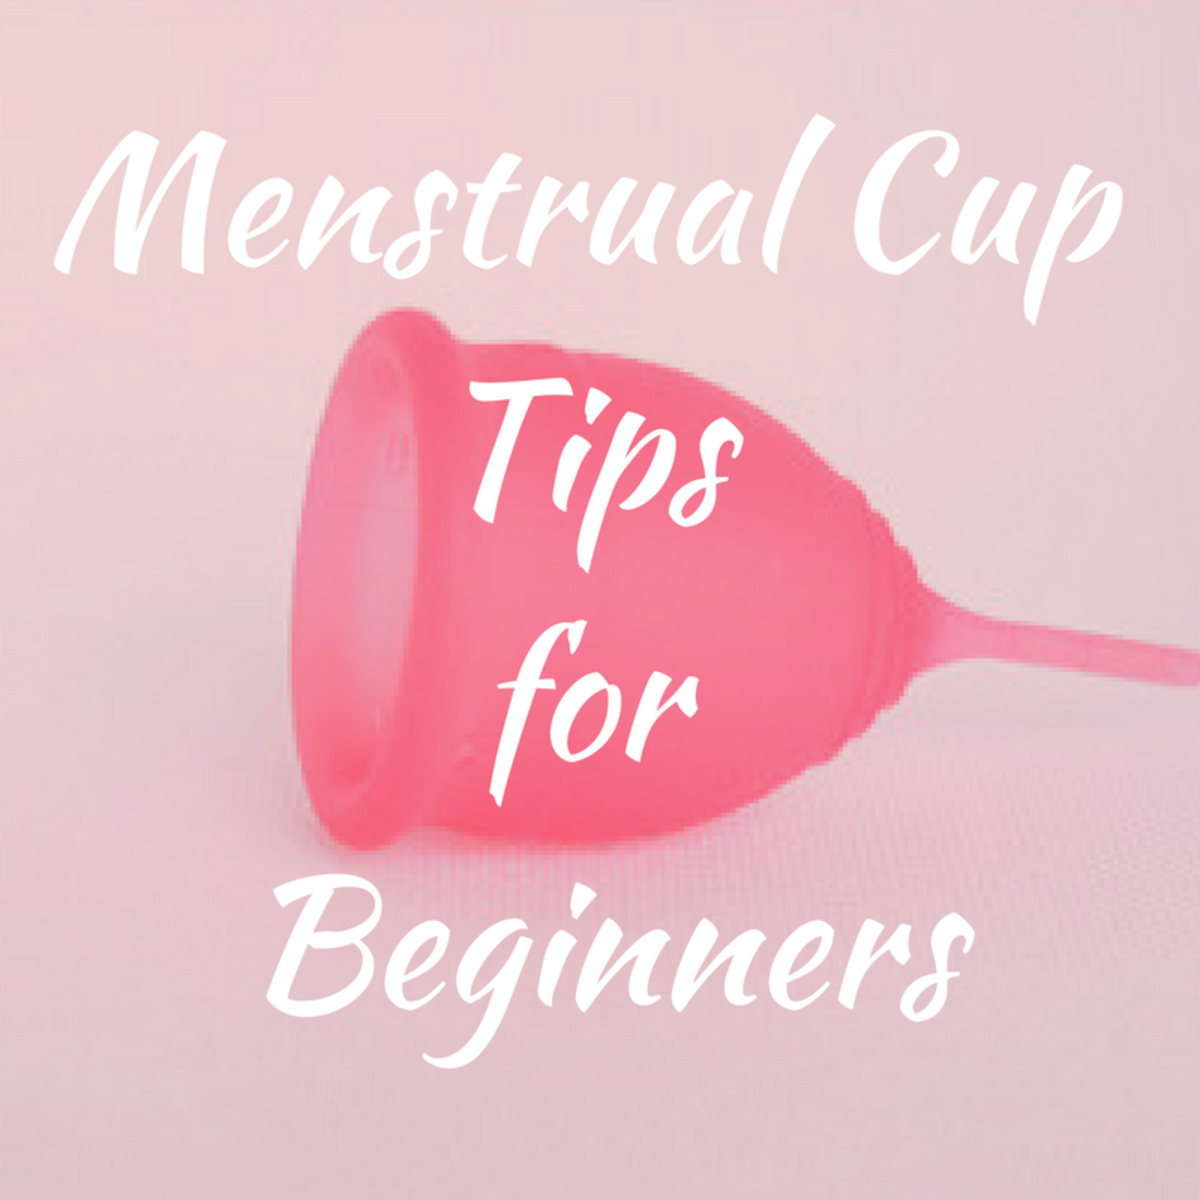 How to properly use menstrual cups